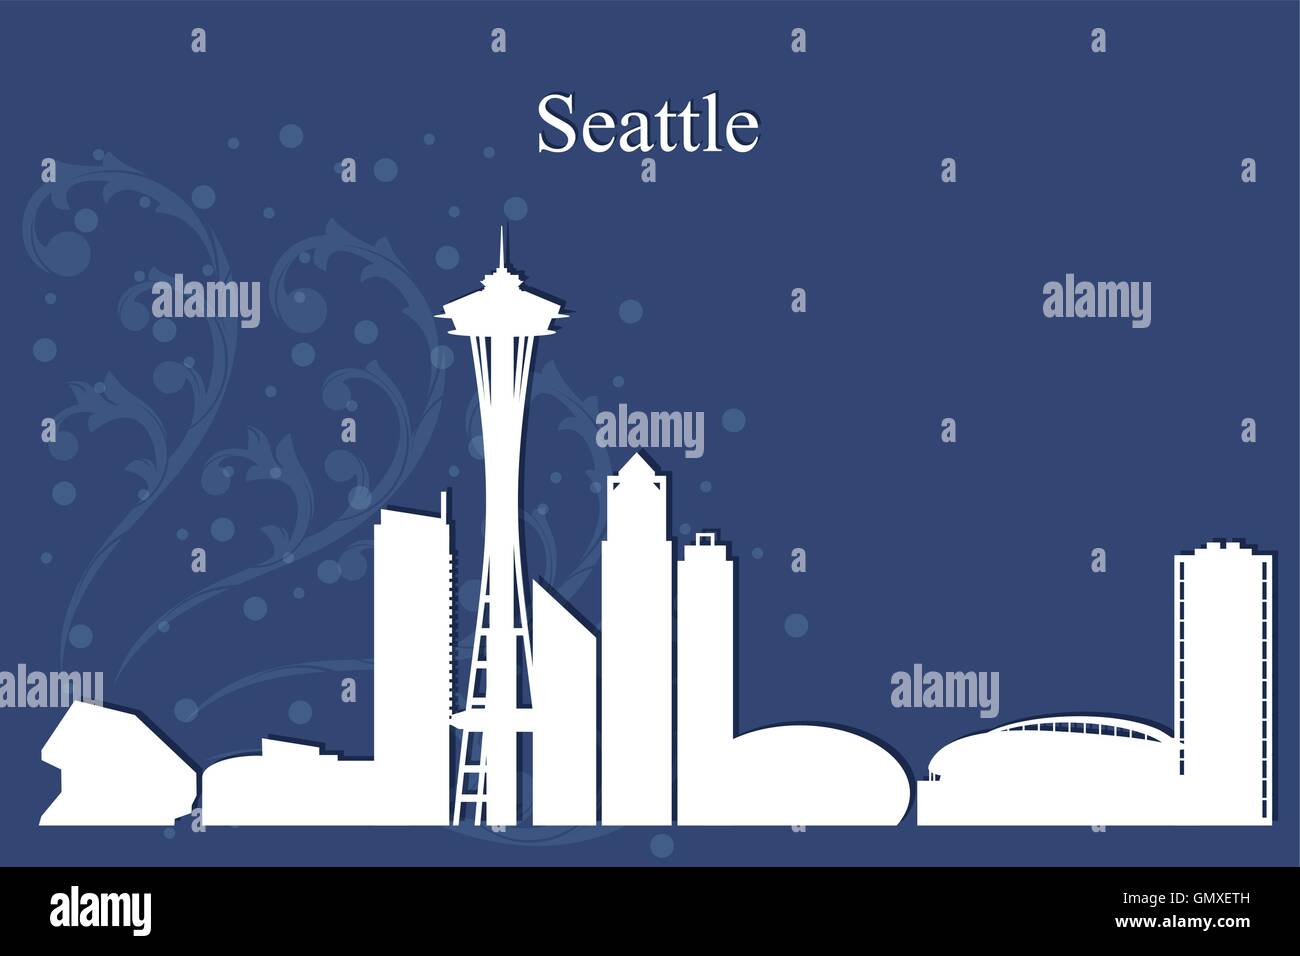 Seattle city skyline silhouette on blue background Stock Vector